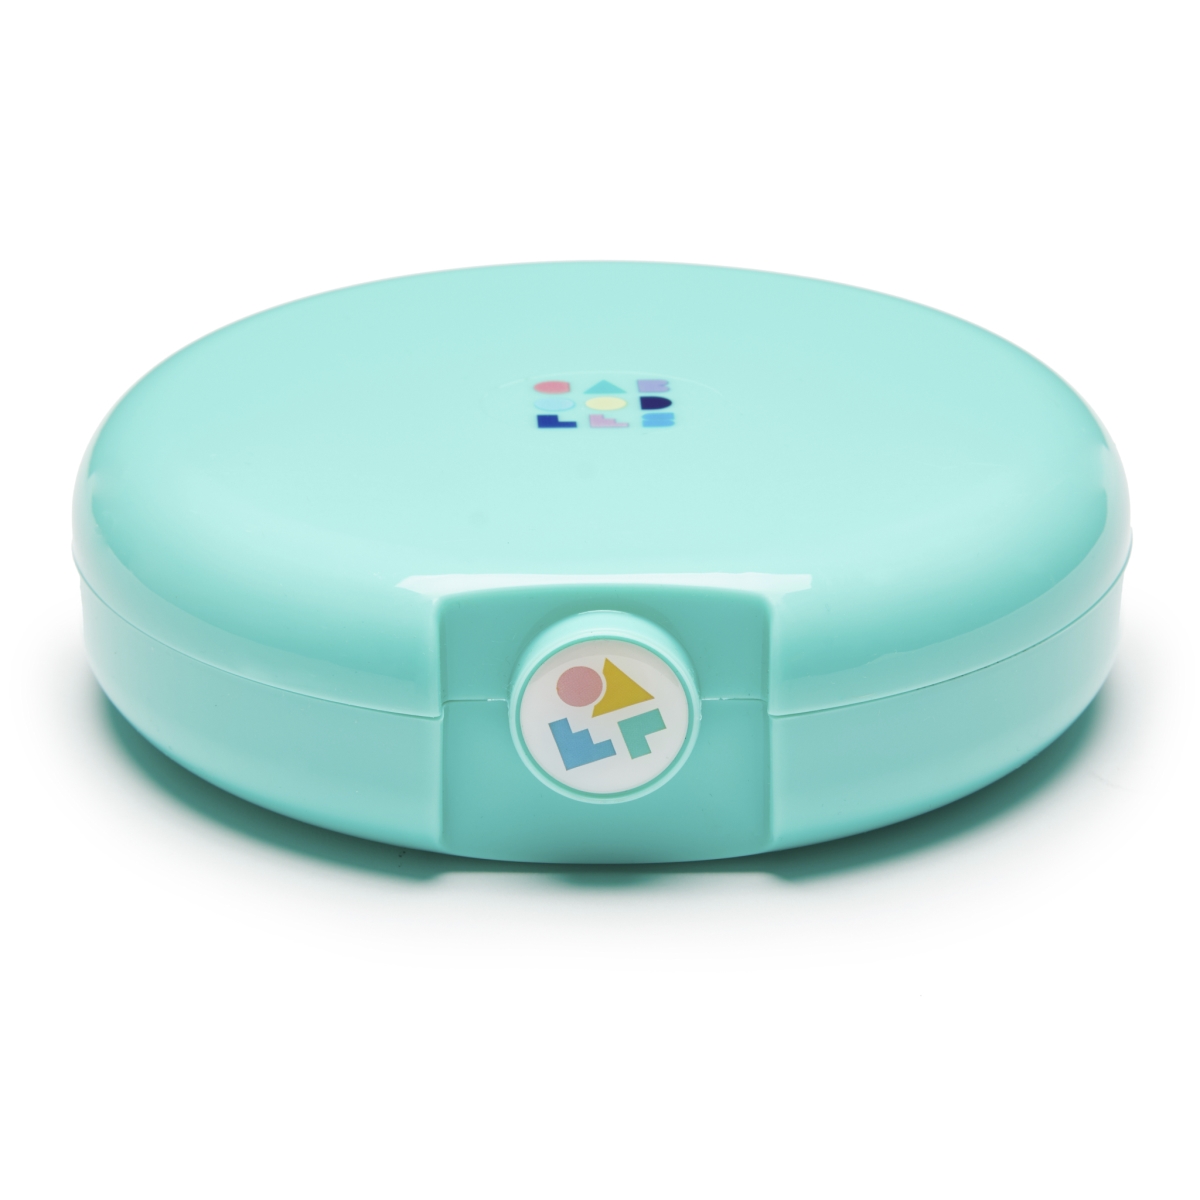 Cab5860t1 Cosmic Cosmetic Compact, Turquoise